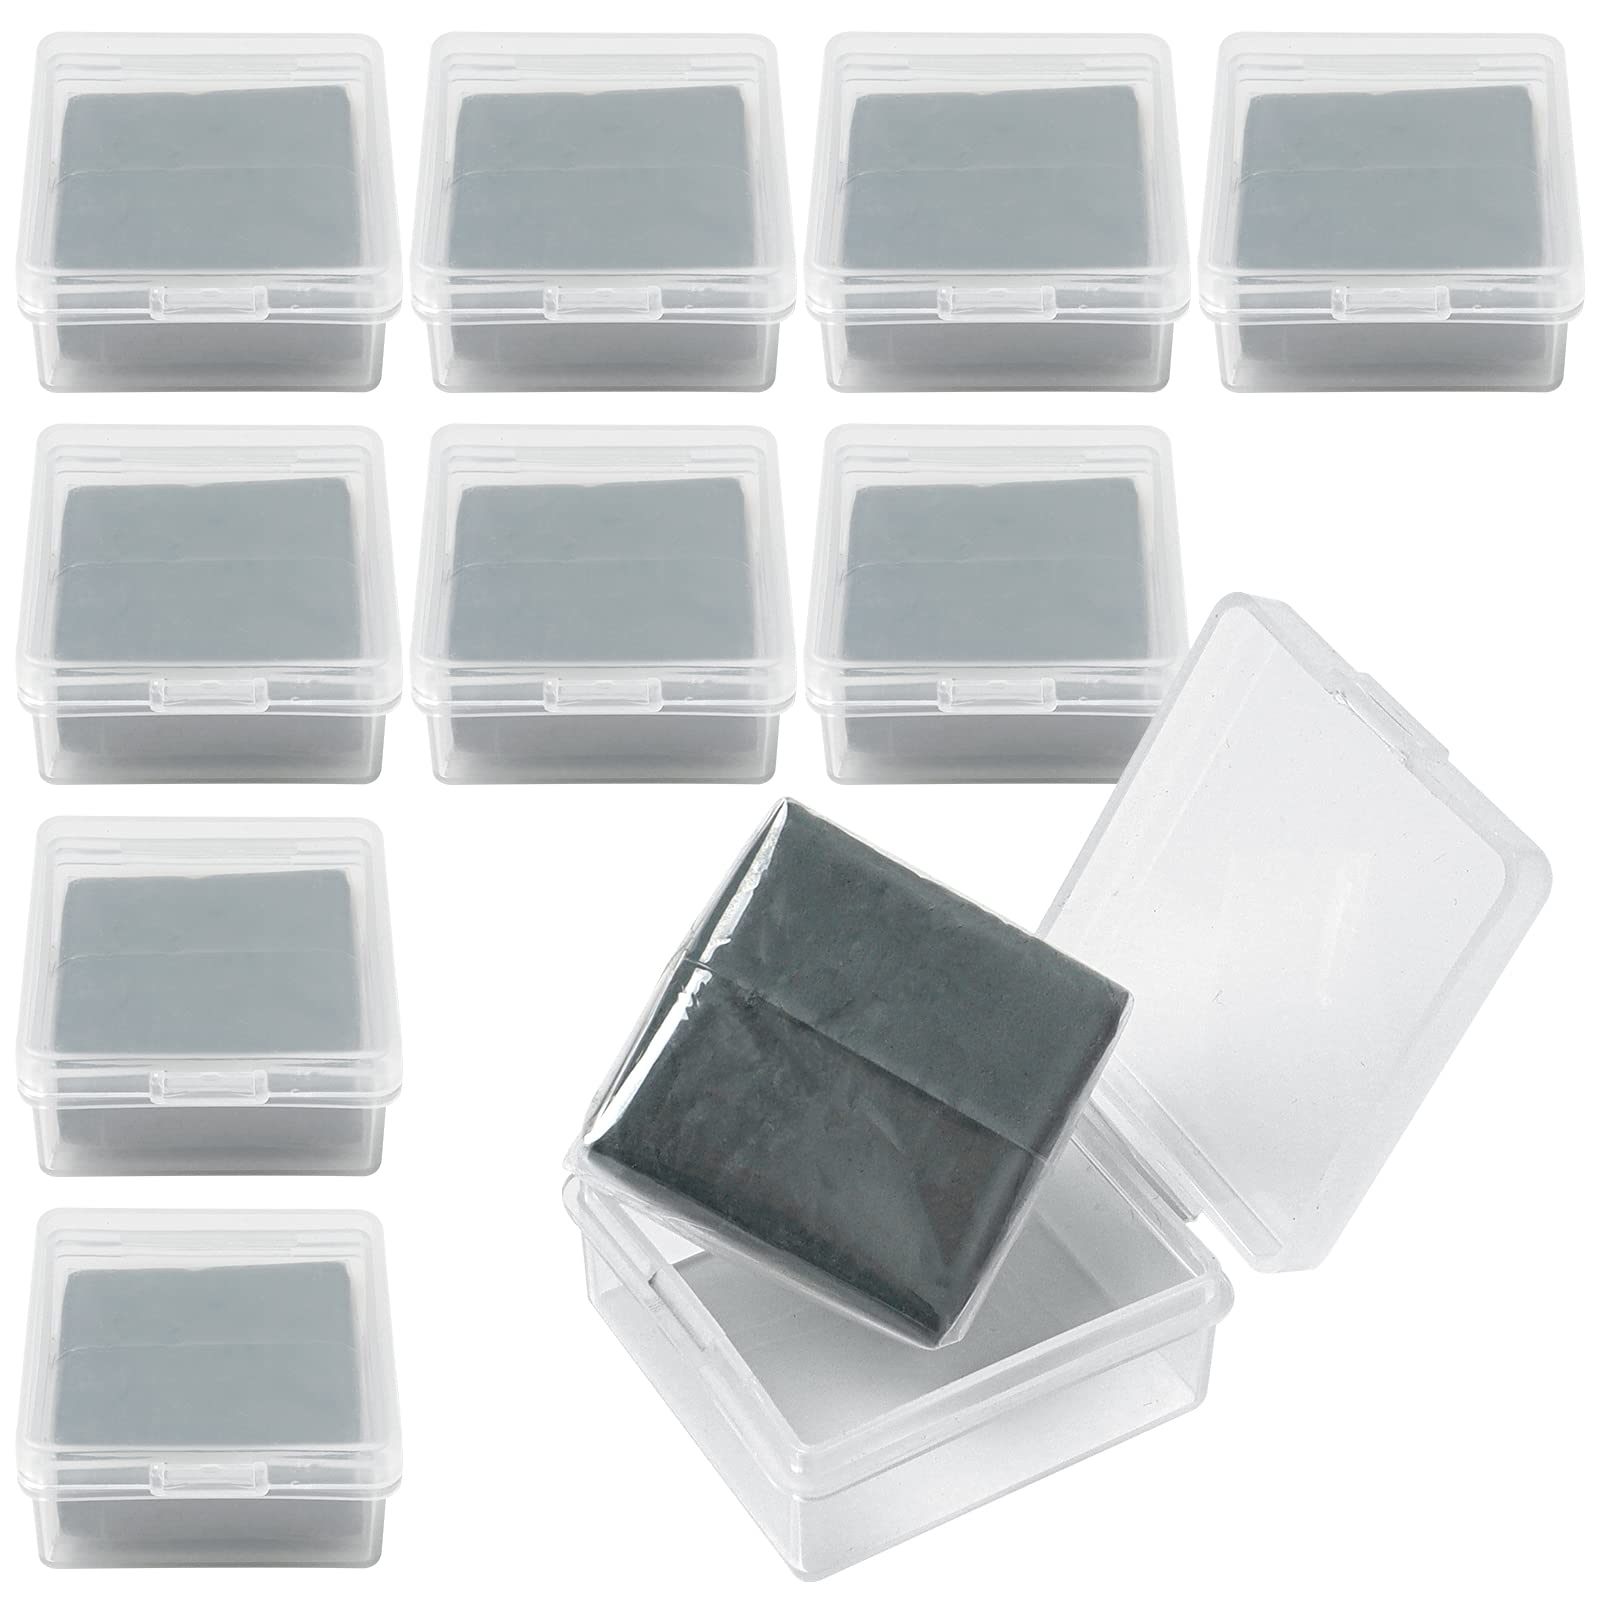  Large Grey Kneaded Eraser : Office Products